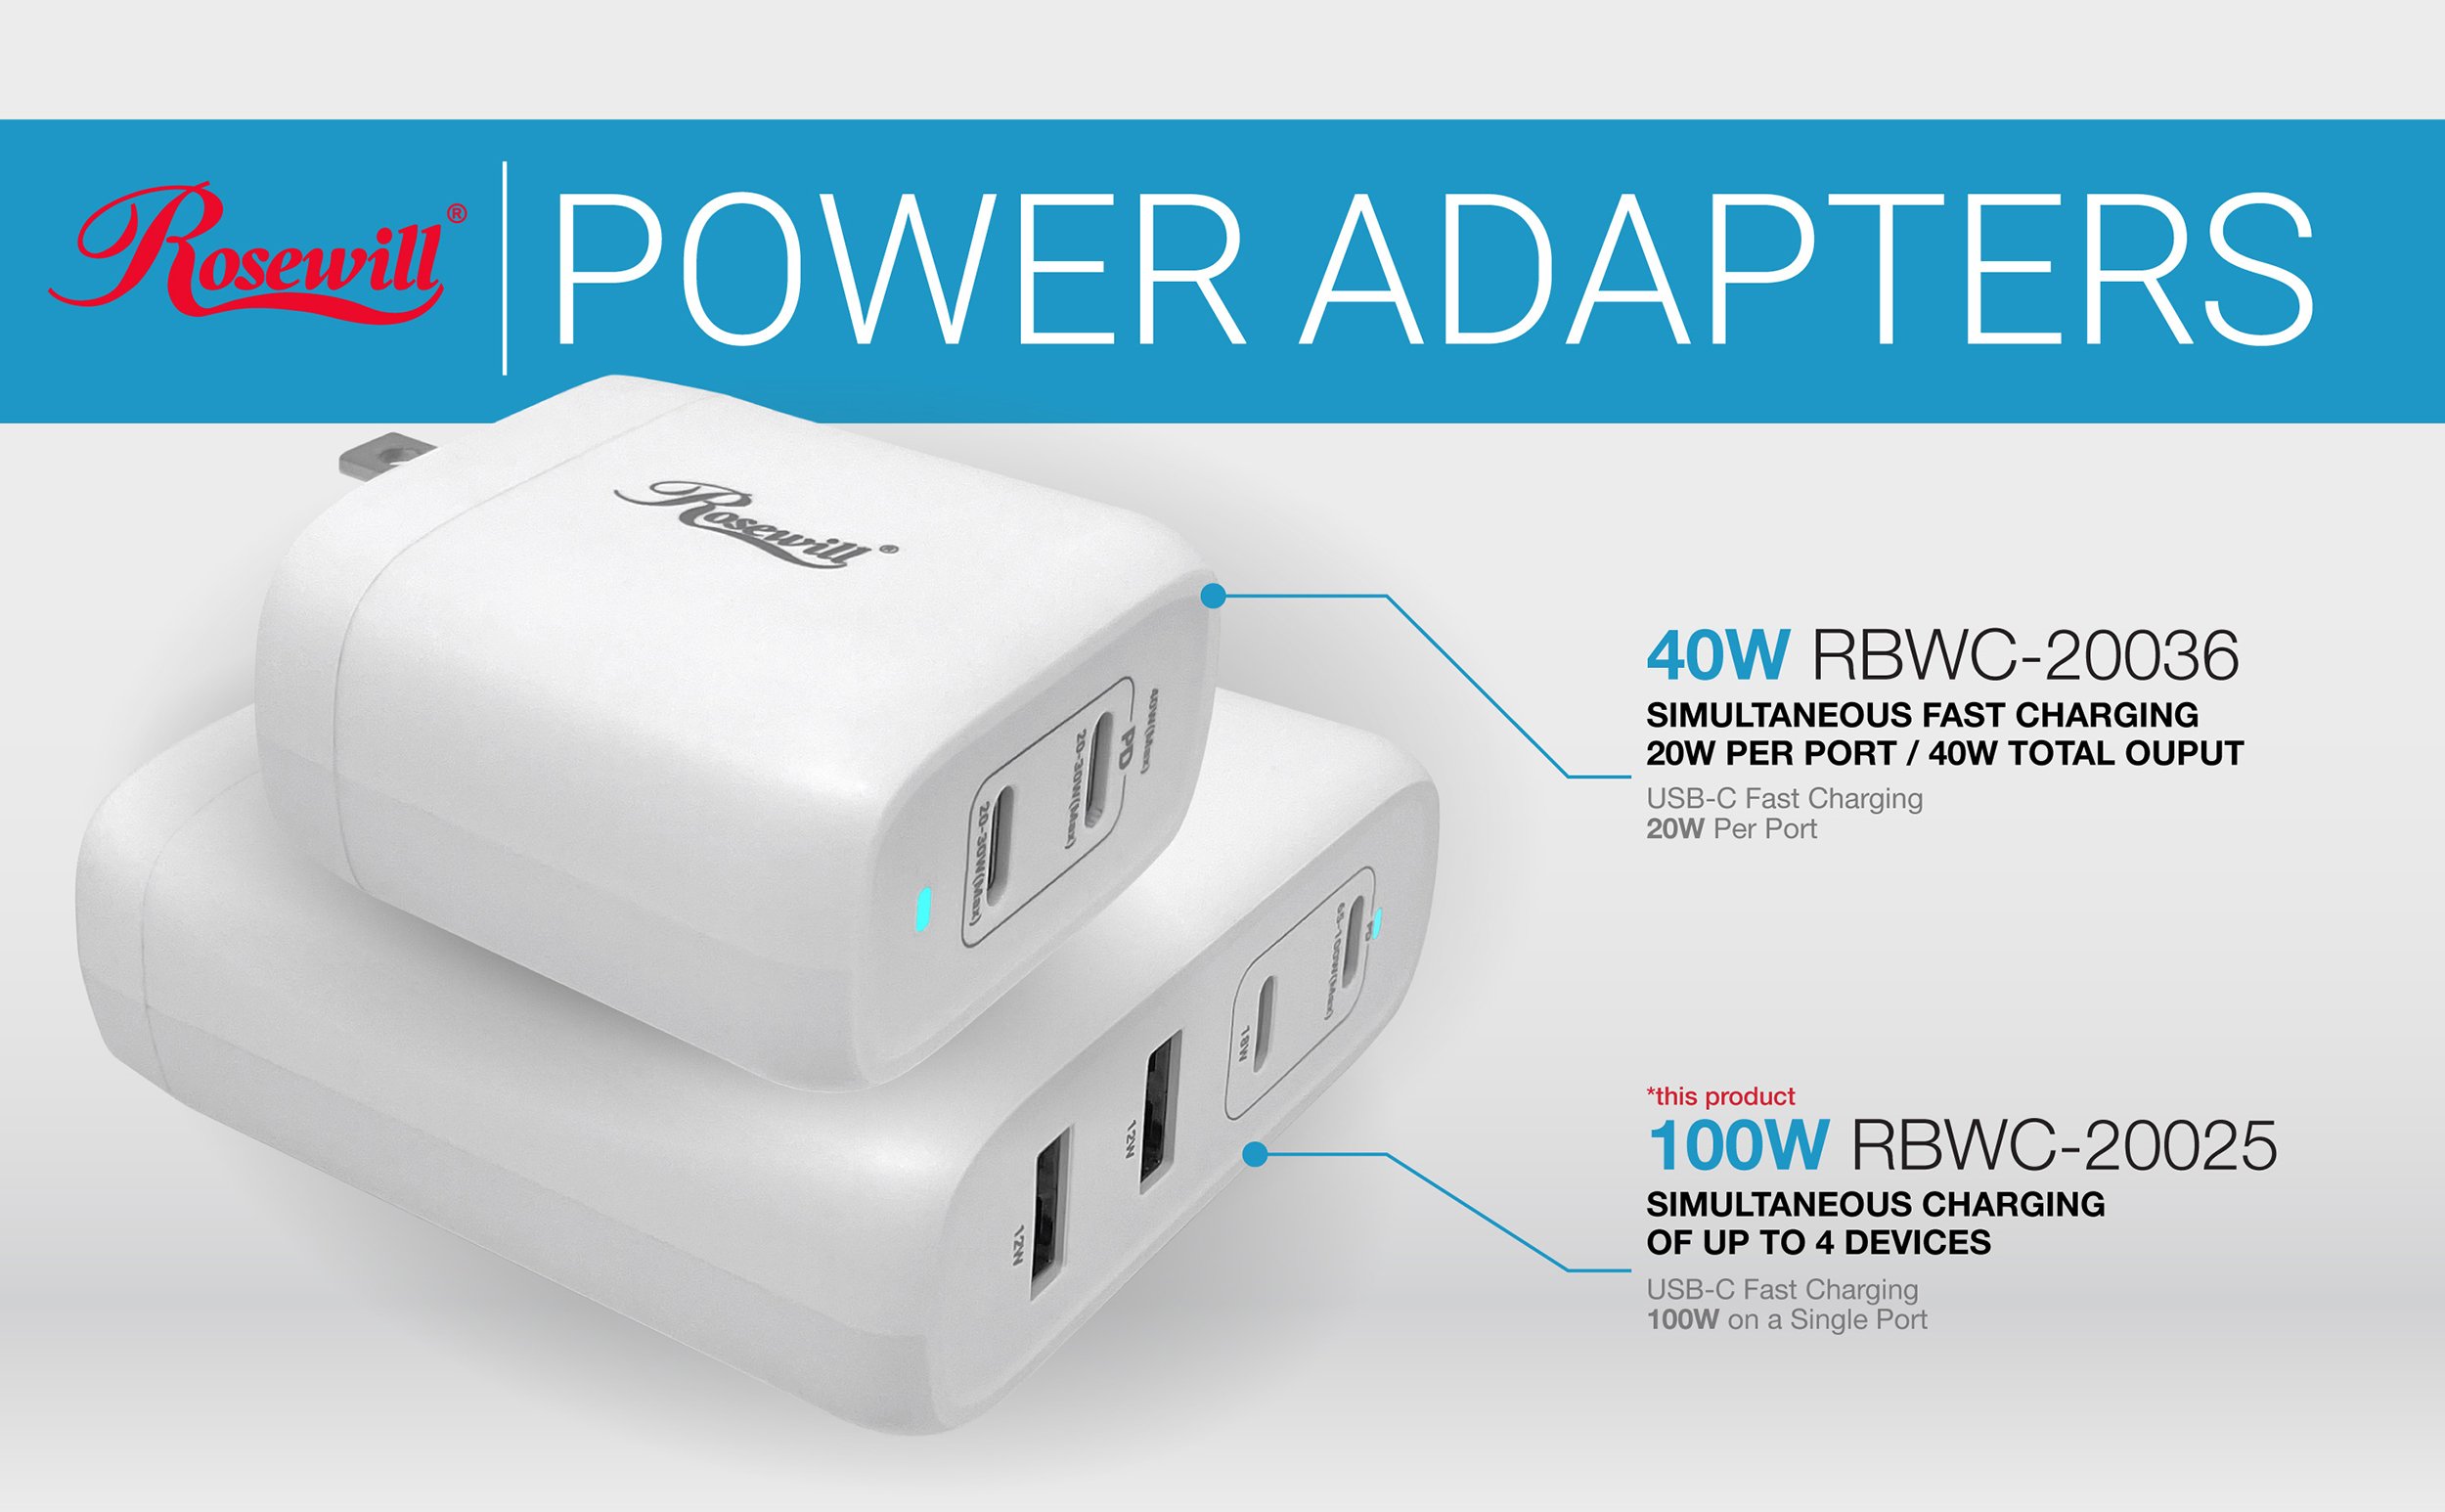 100W, fast charge, Quick Charge, GaN, power adapter, USB-C, USB-A, USB, Type-C, Power Delivery, PD